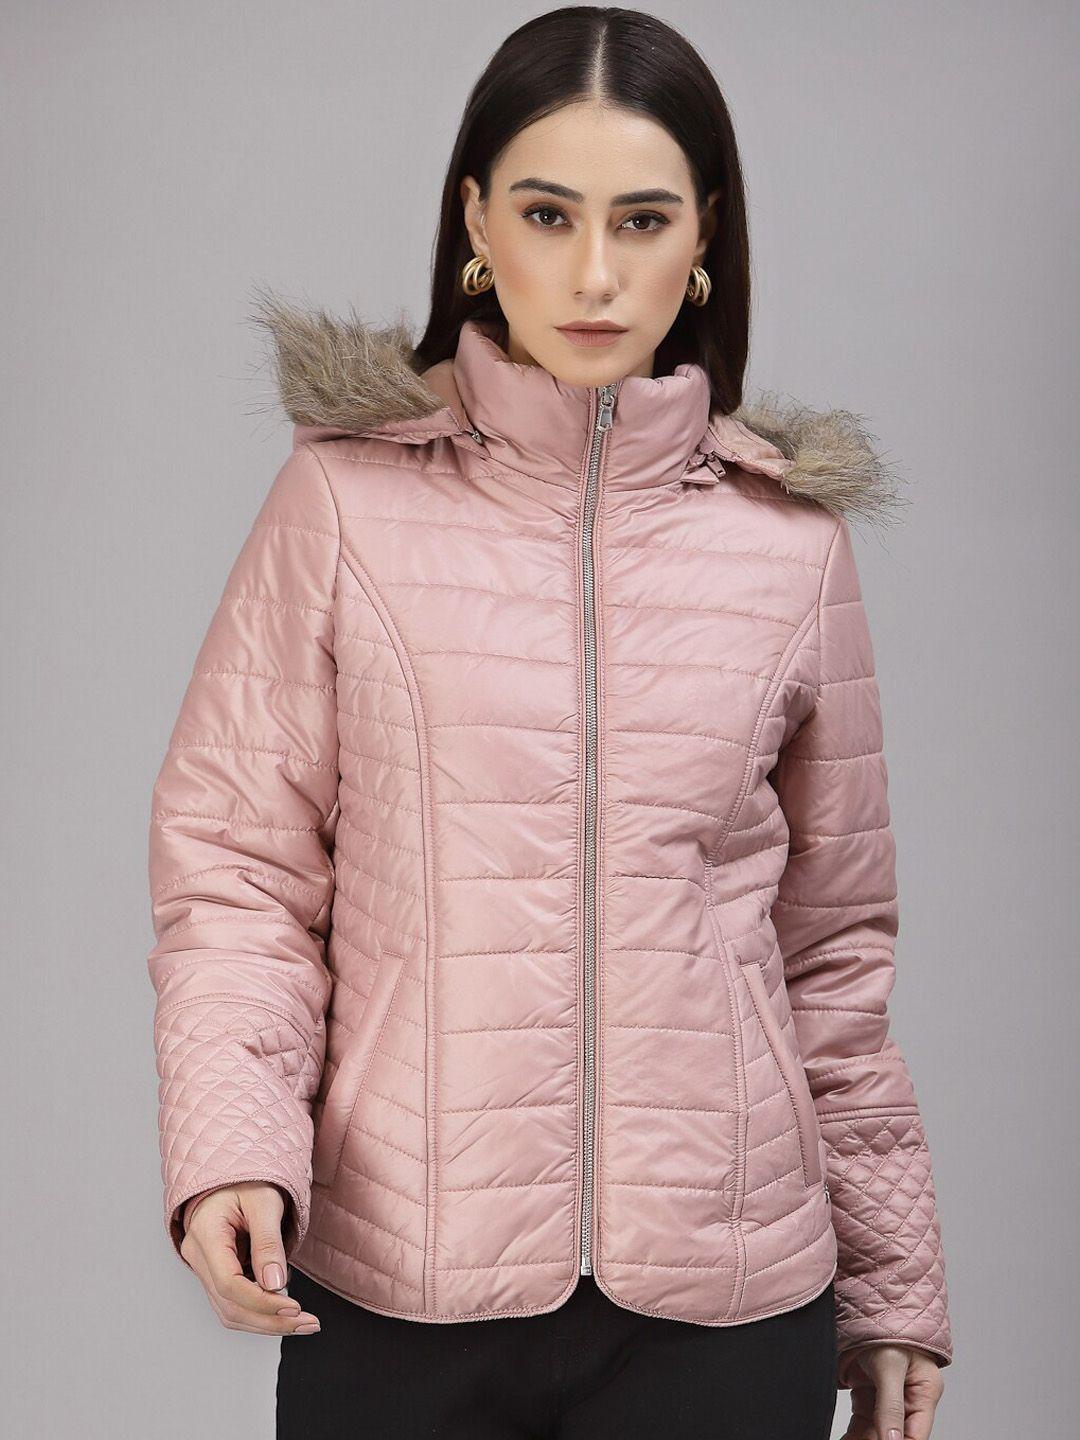 gipsy lightweight puffer jacket with faux fur trim detail